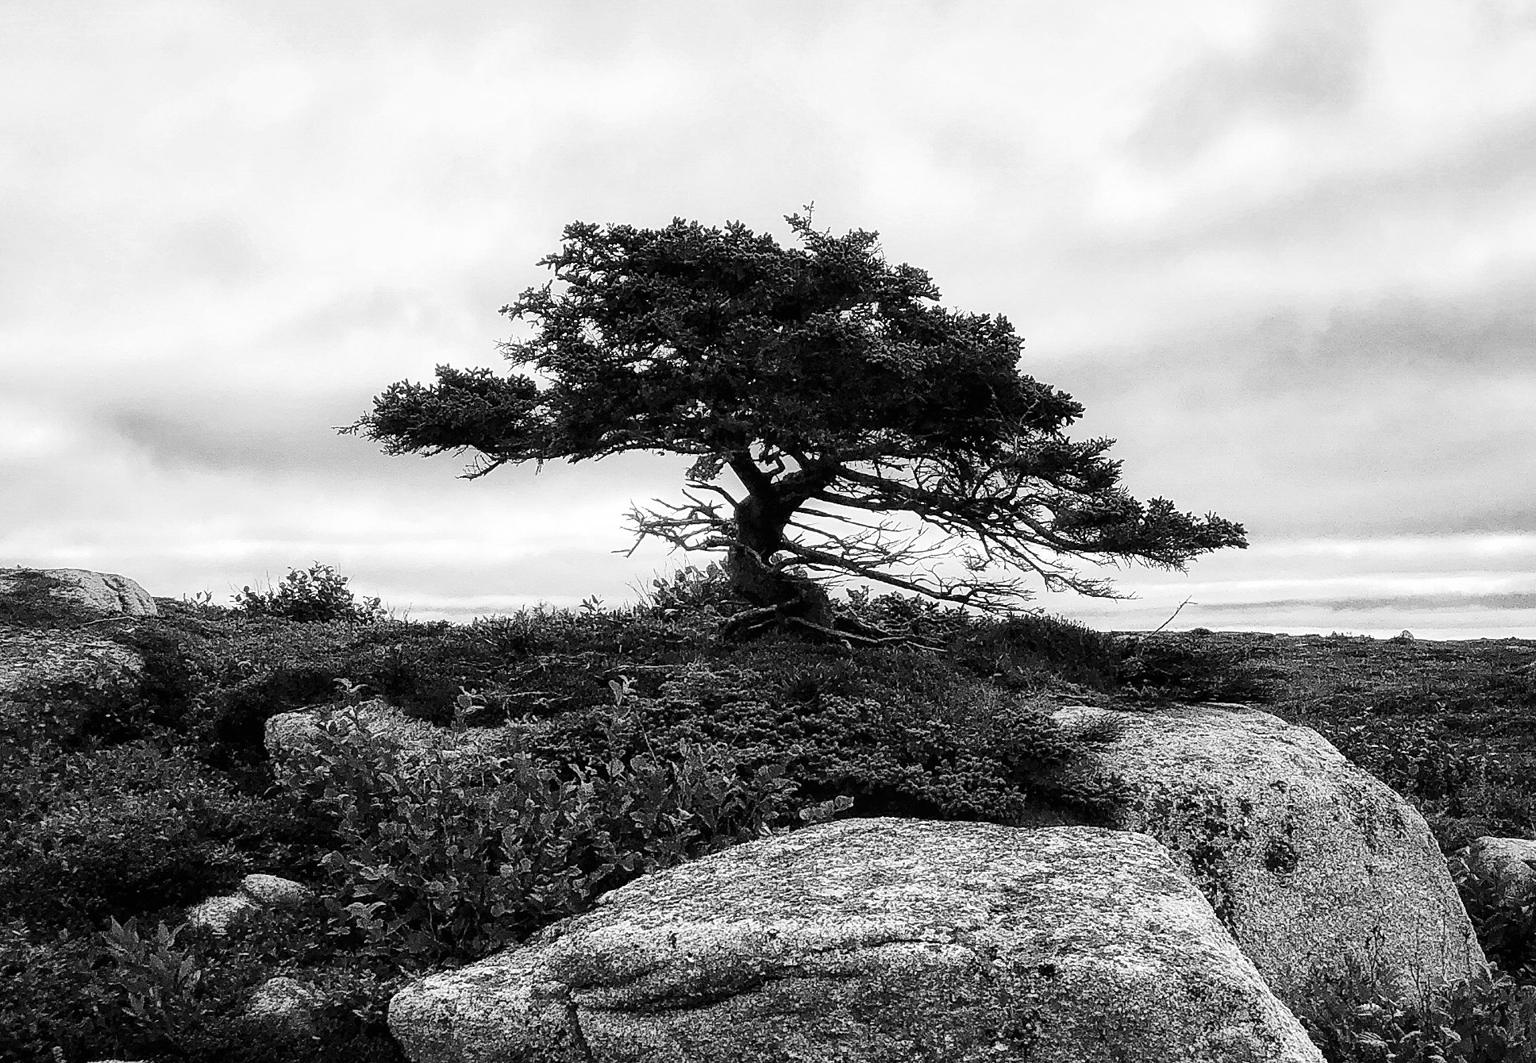 Coastal Tree and Rocks - Photograph by Terry Bell